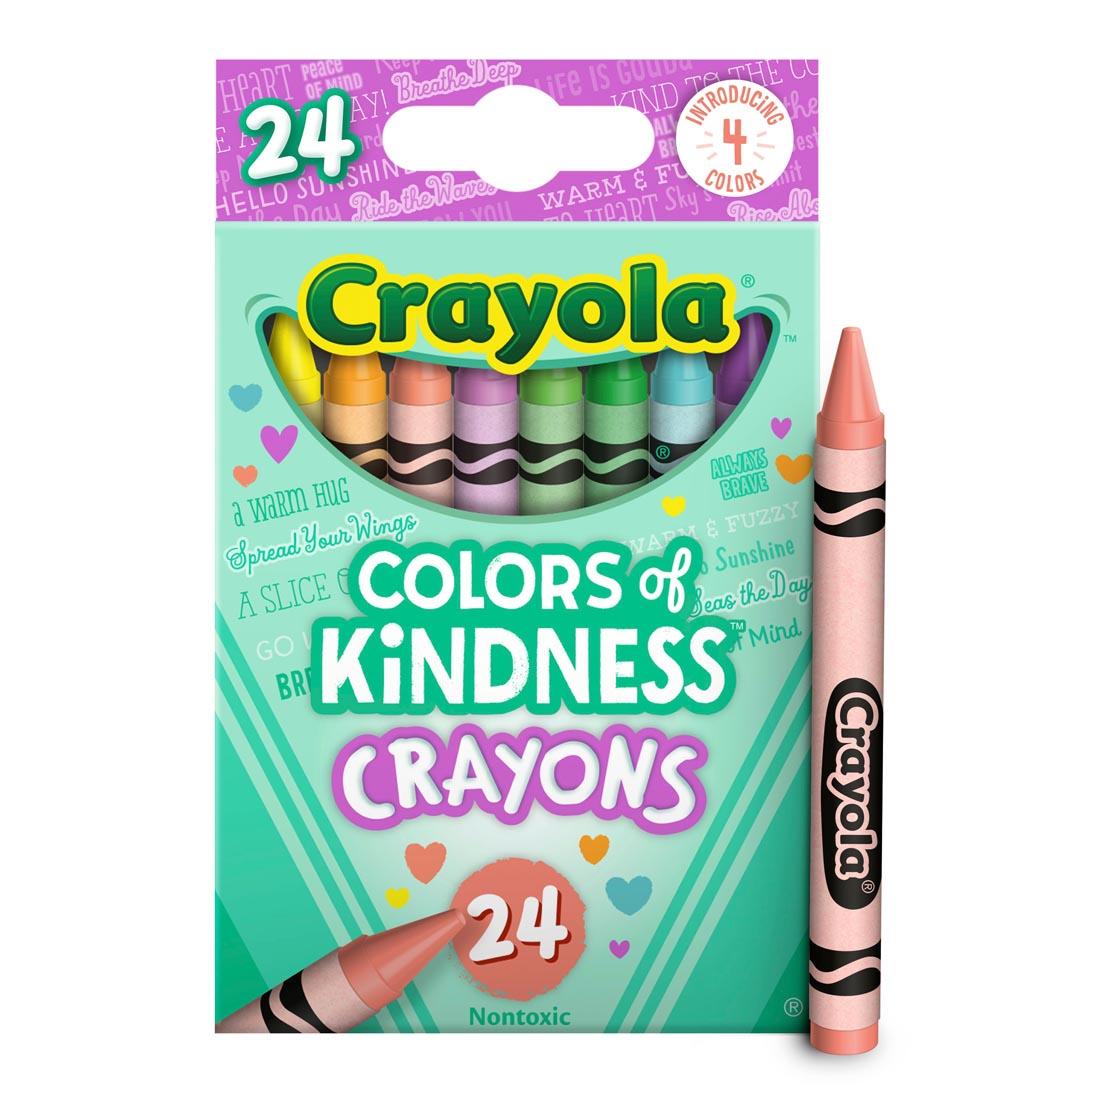 Box of Crayola Colors of Kindness Crayons 24-Count Set with one crayon shown